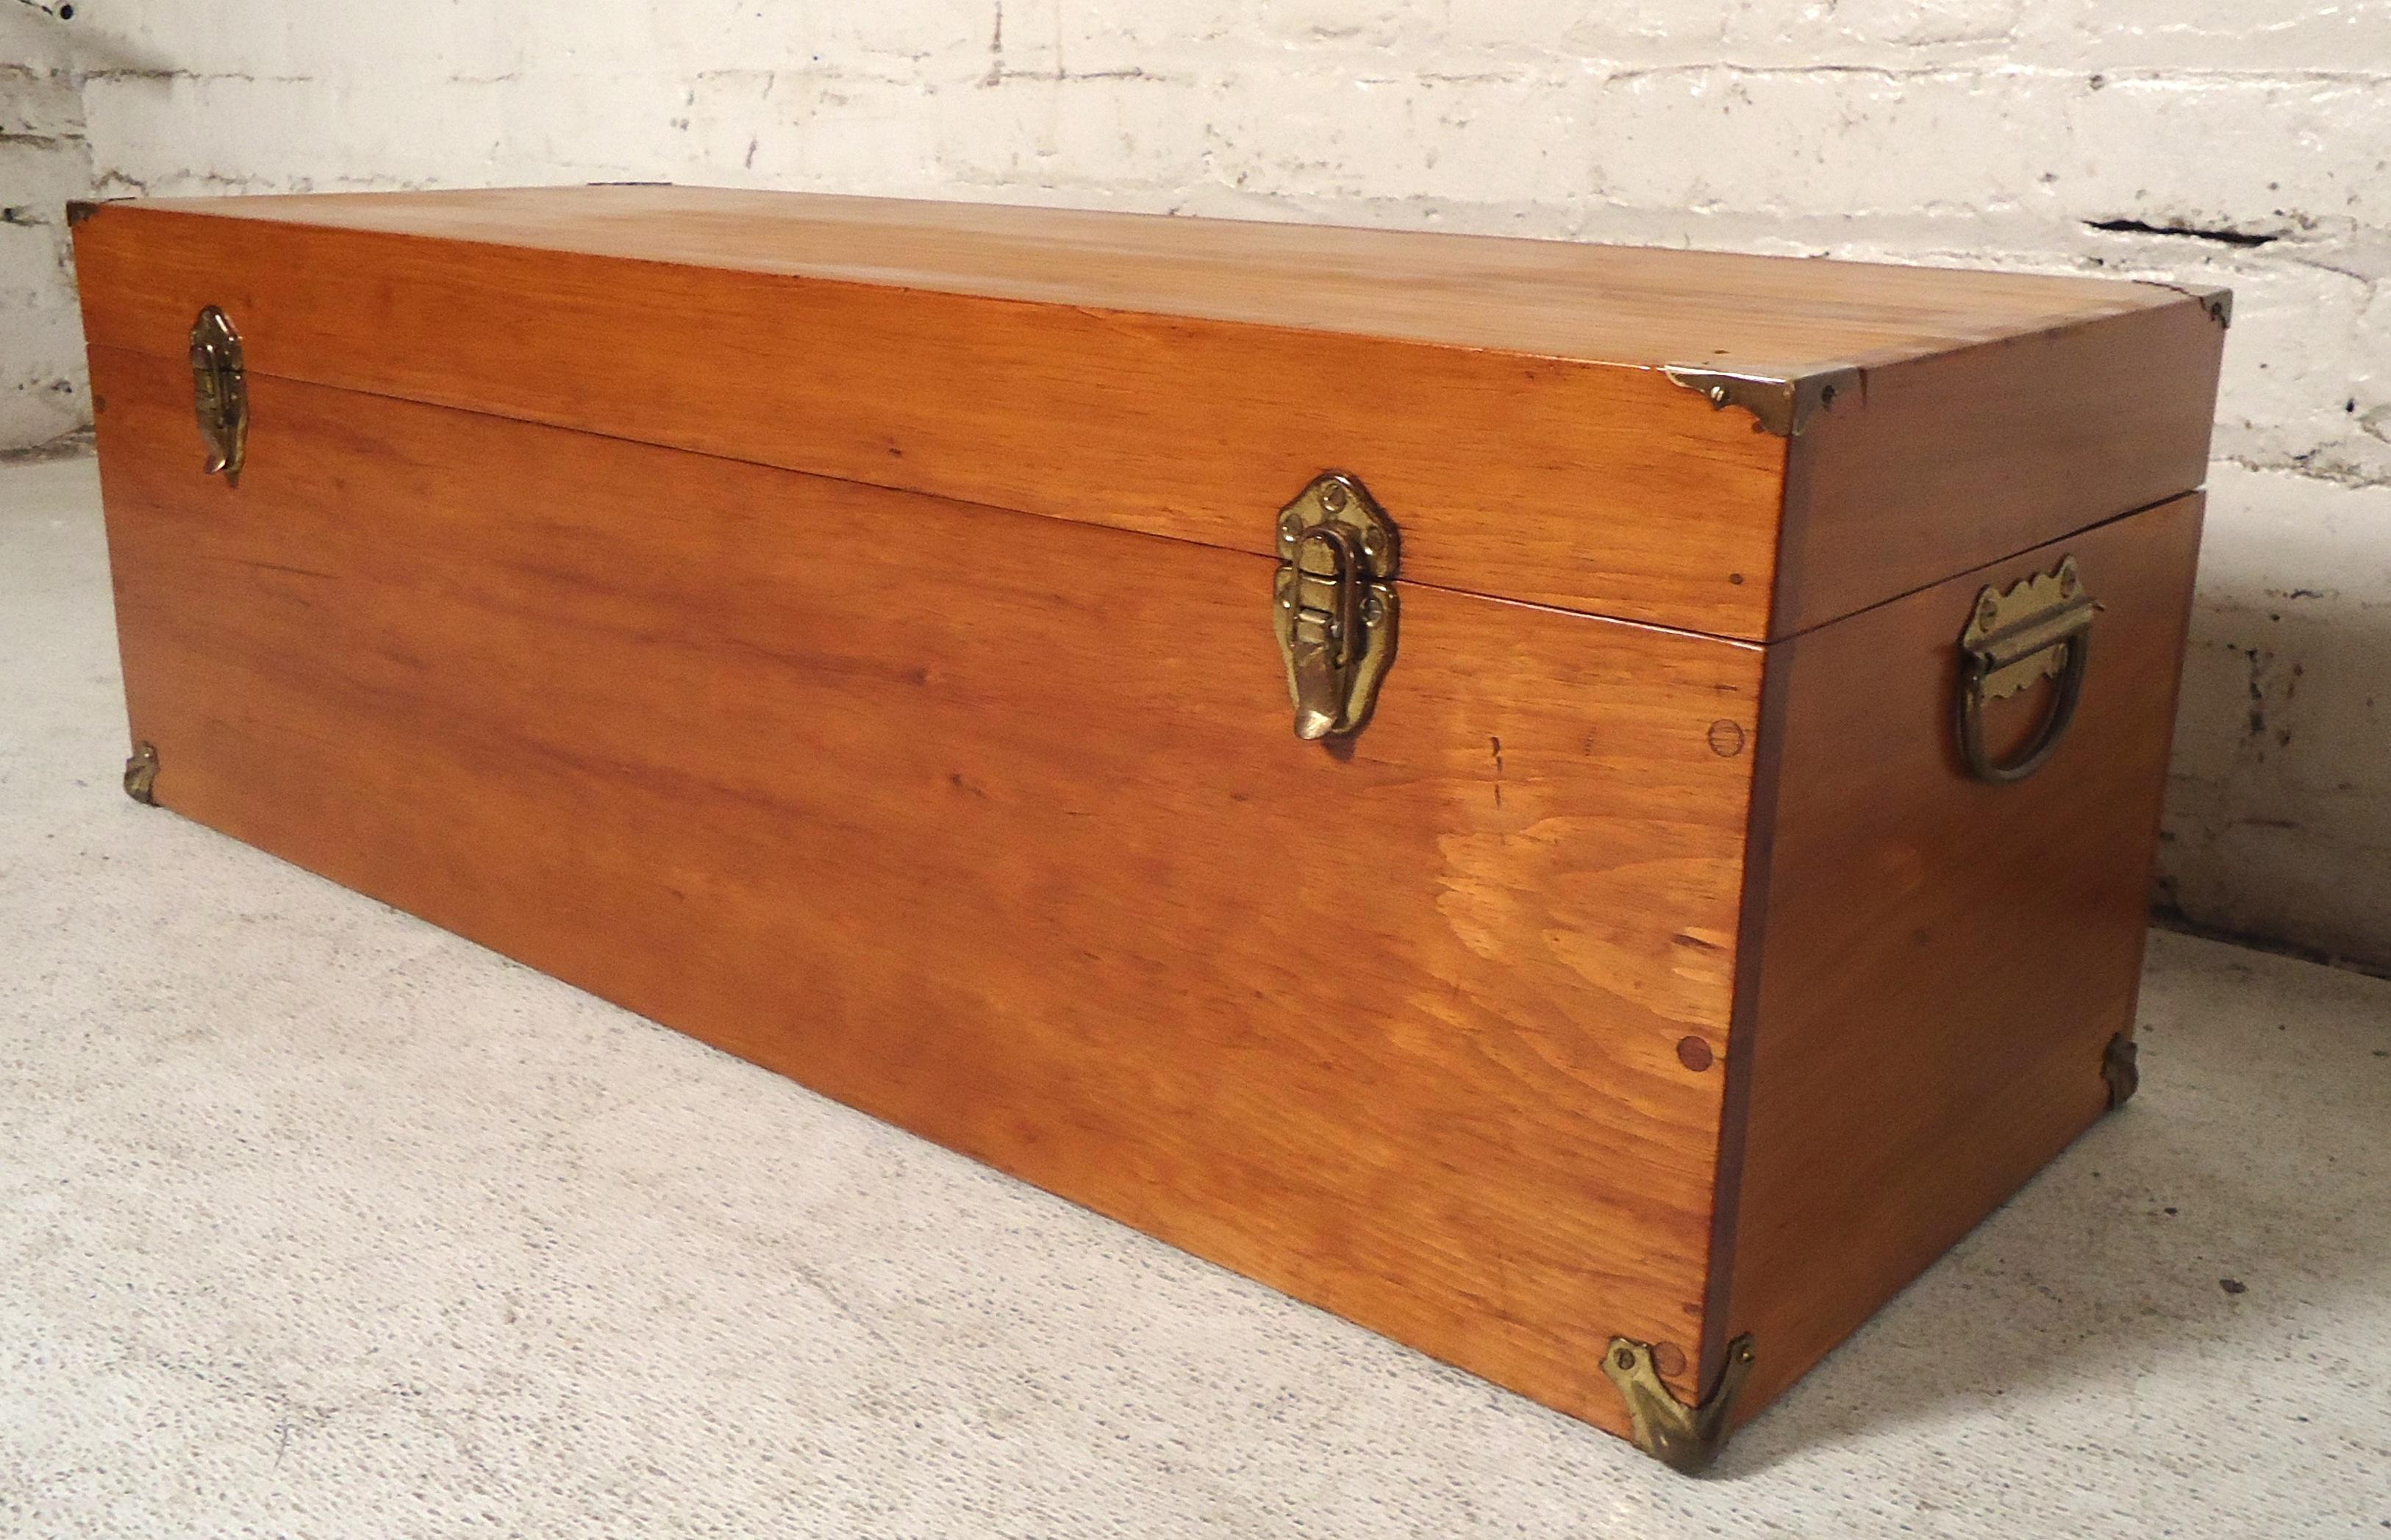 Teak wood trunk with brass hardware and interior wood tray.

(Please confirm item location - NY or NJ - with dealer).
 